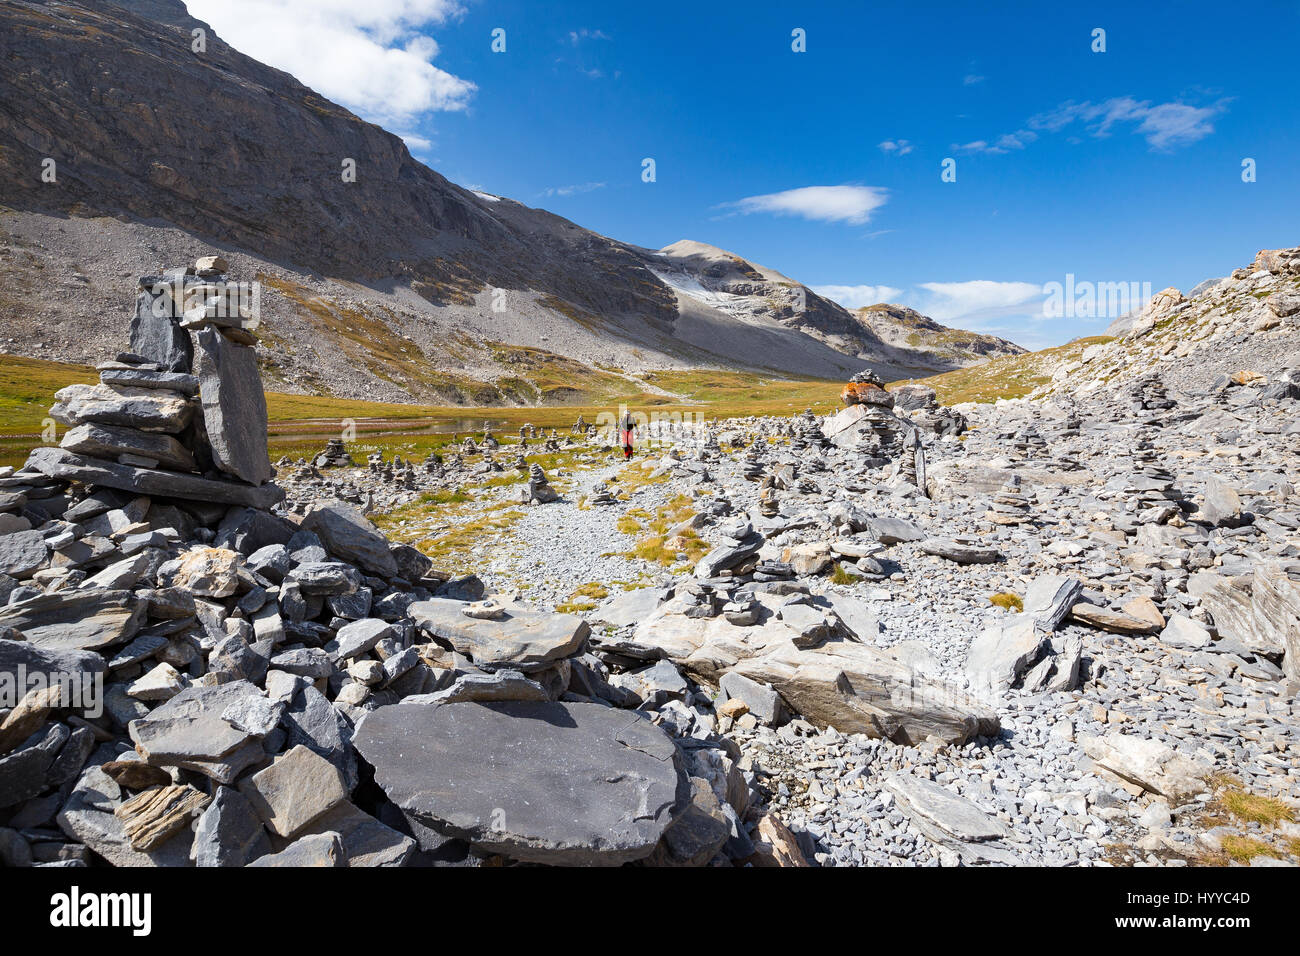 Stones and path signals on hiking trail near Vanoise torrent. Hikers. Parc National de la Vanoise. France. Europe. Stock Photo